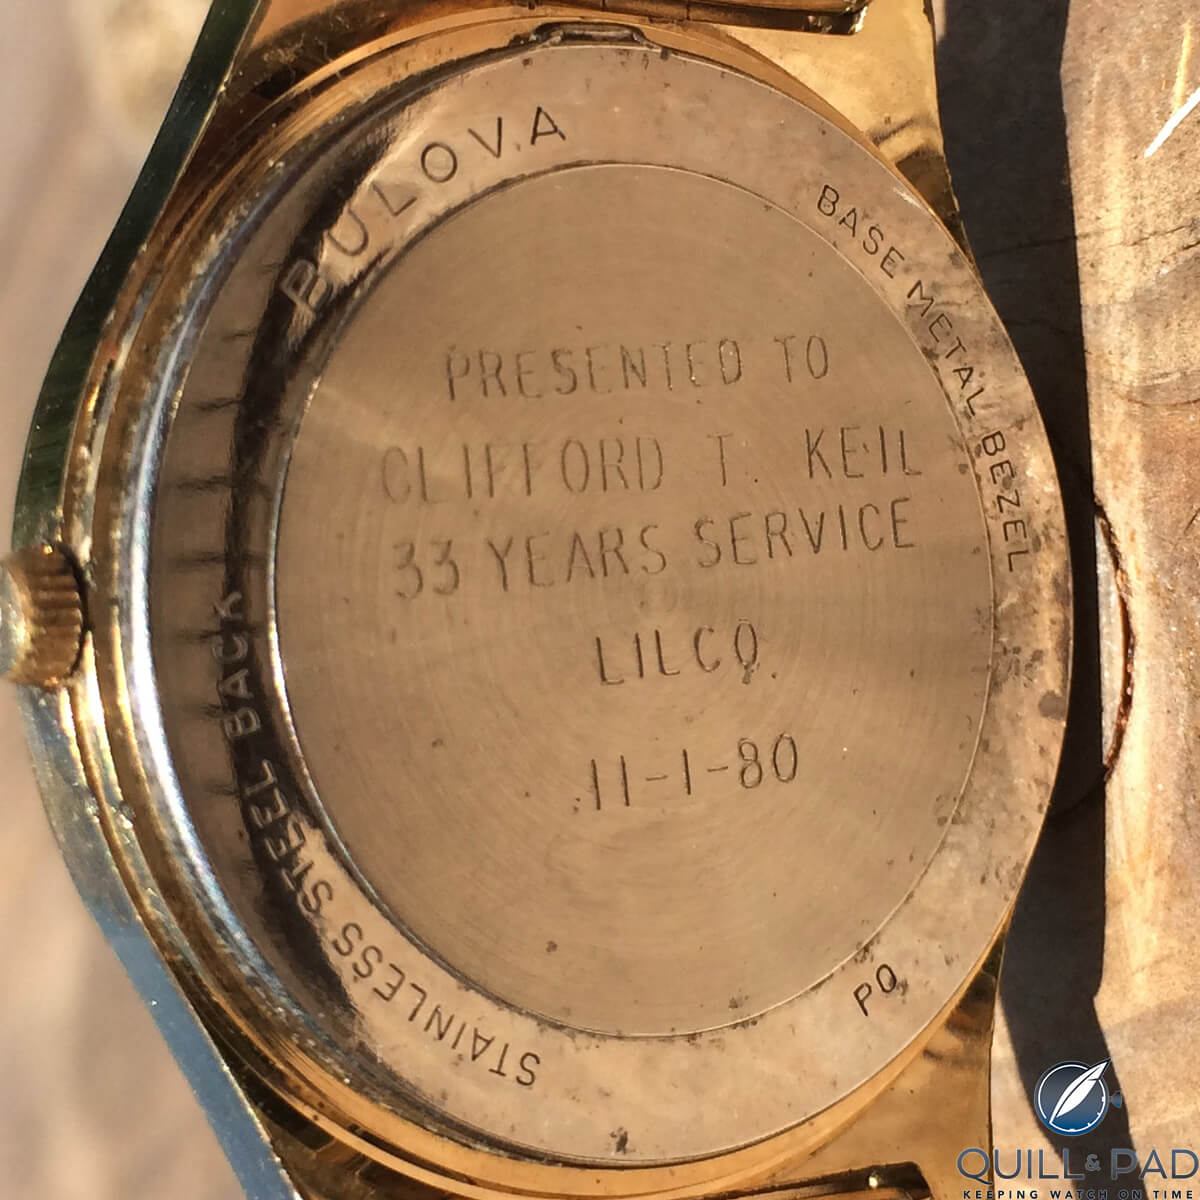 Case back engraving on my Bulova Accutron commemorating Pop-Pop’s 33 years of service